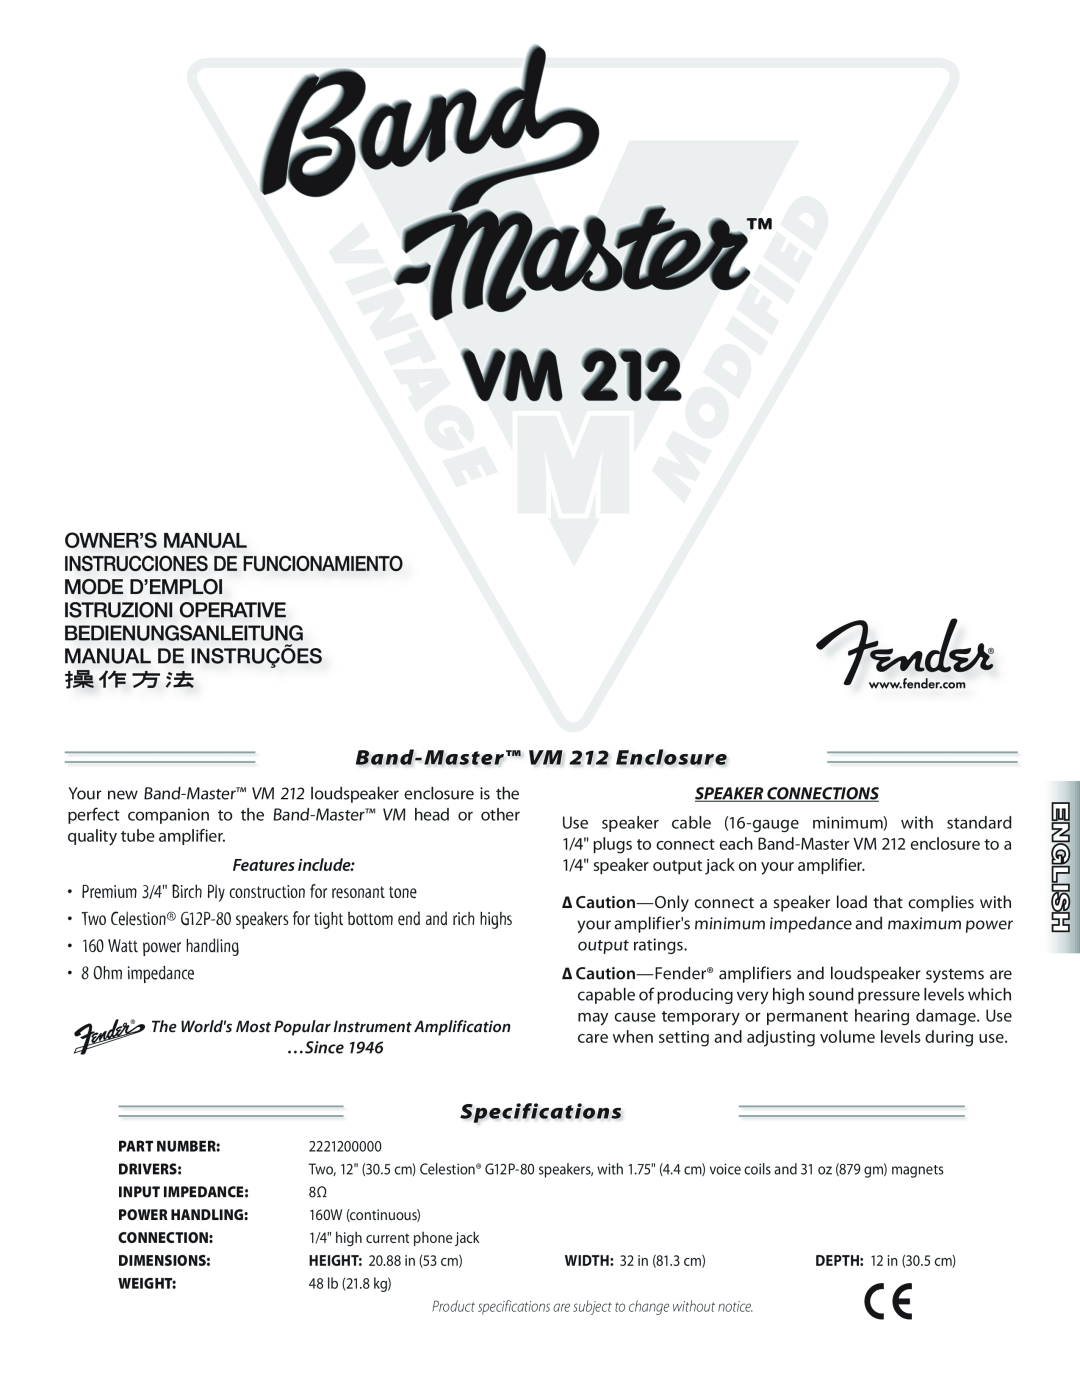 Fender specifications Band-MasterVM 212 Enclosure, Specifications, Watt power handling 8 Ohm impedance, …Since 